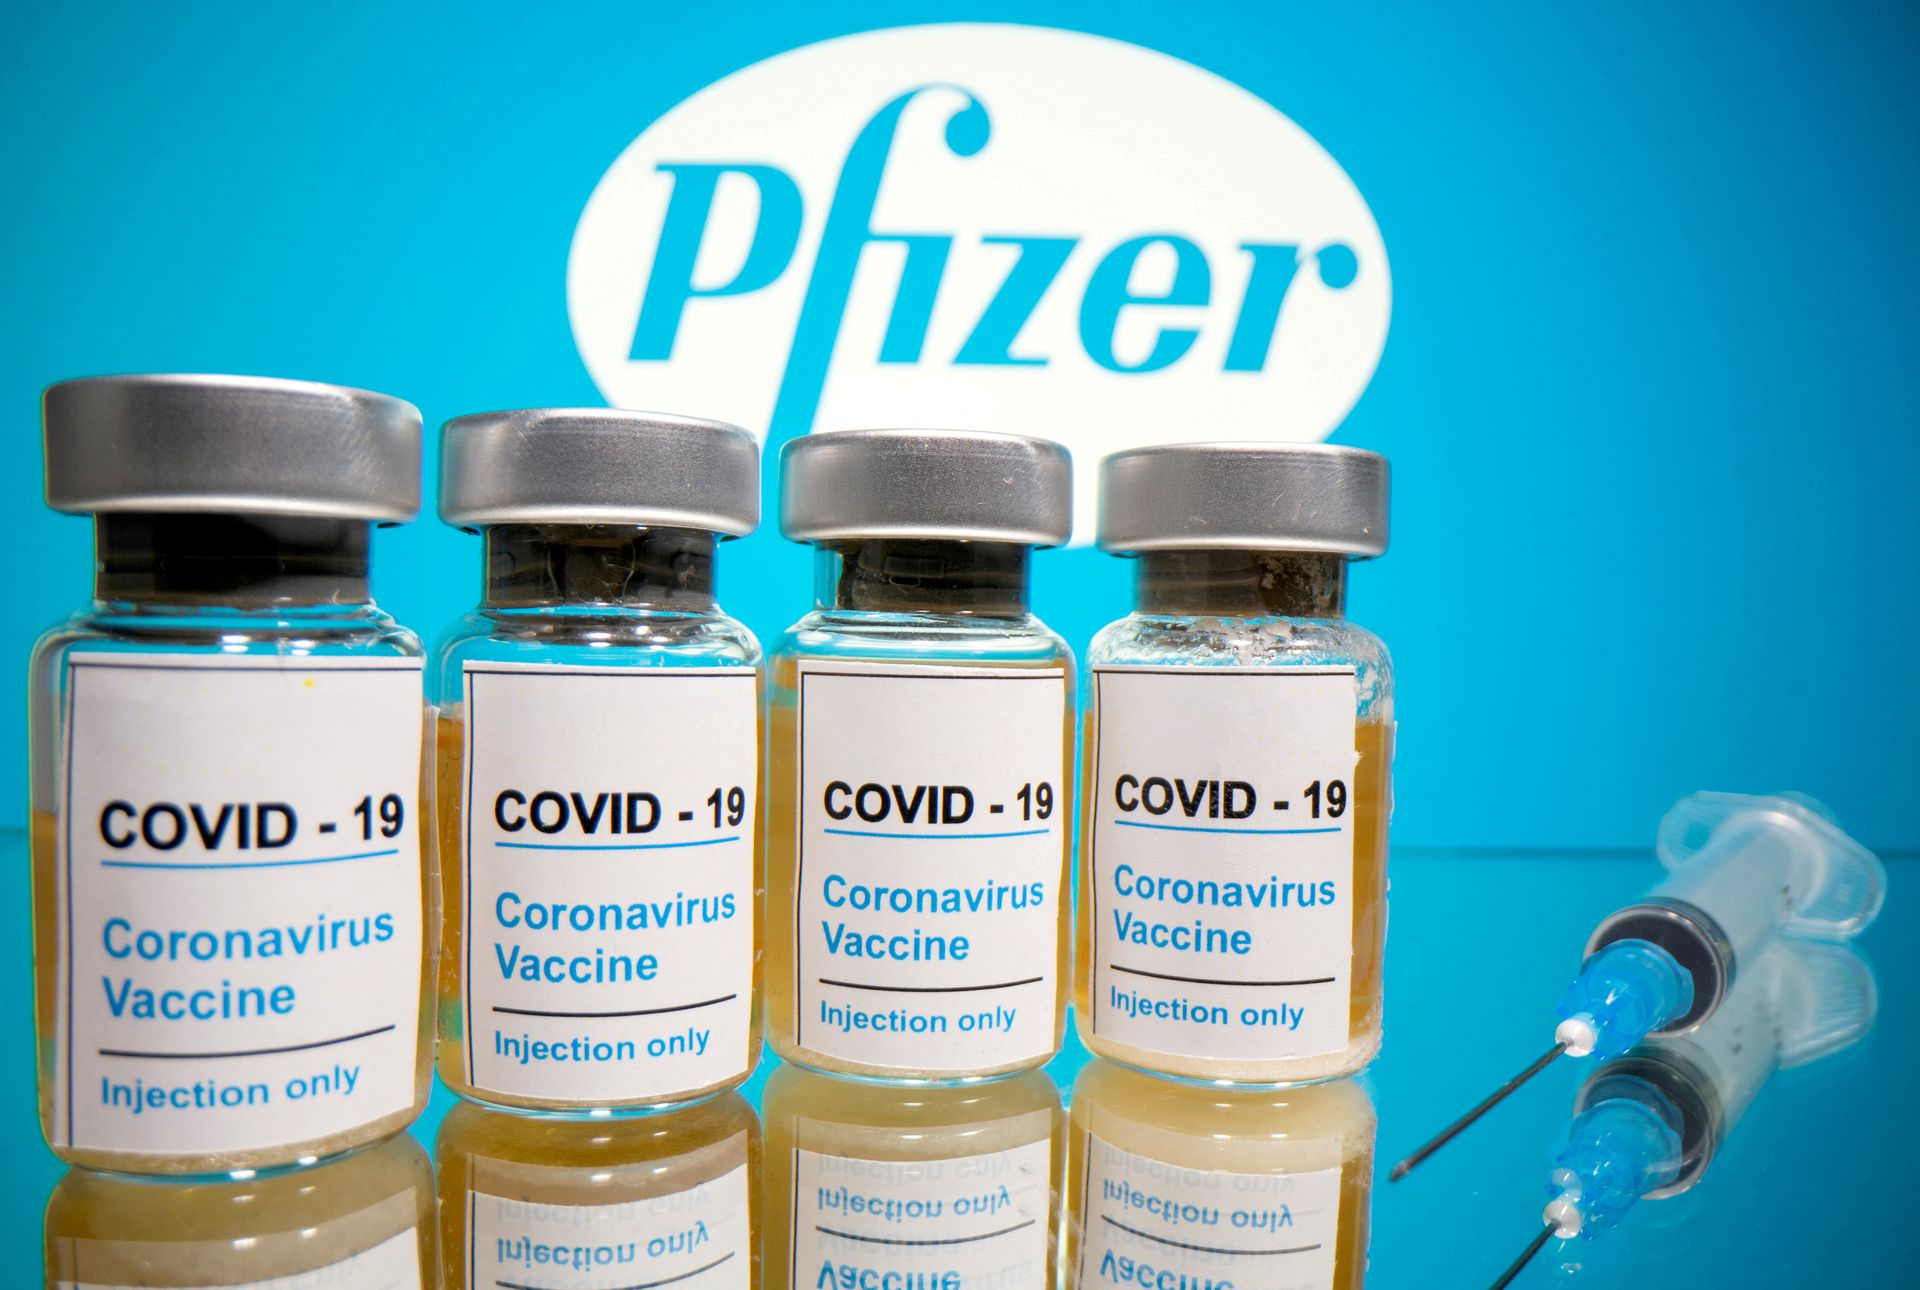 Nigeria Receives 3.2 Million Pfizer COVID-19 Vaccines From US